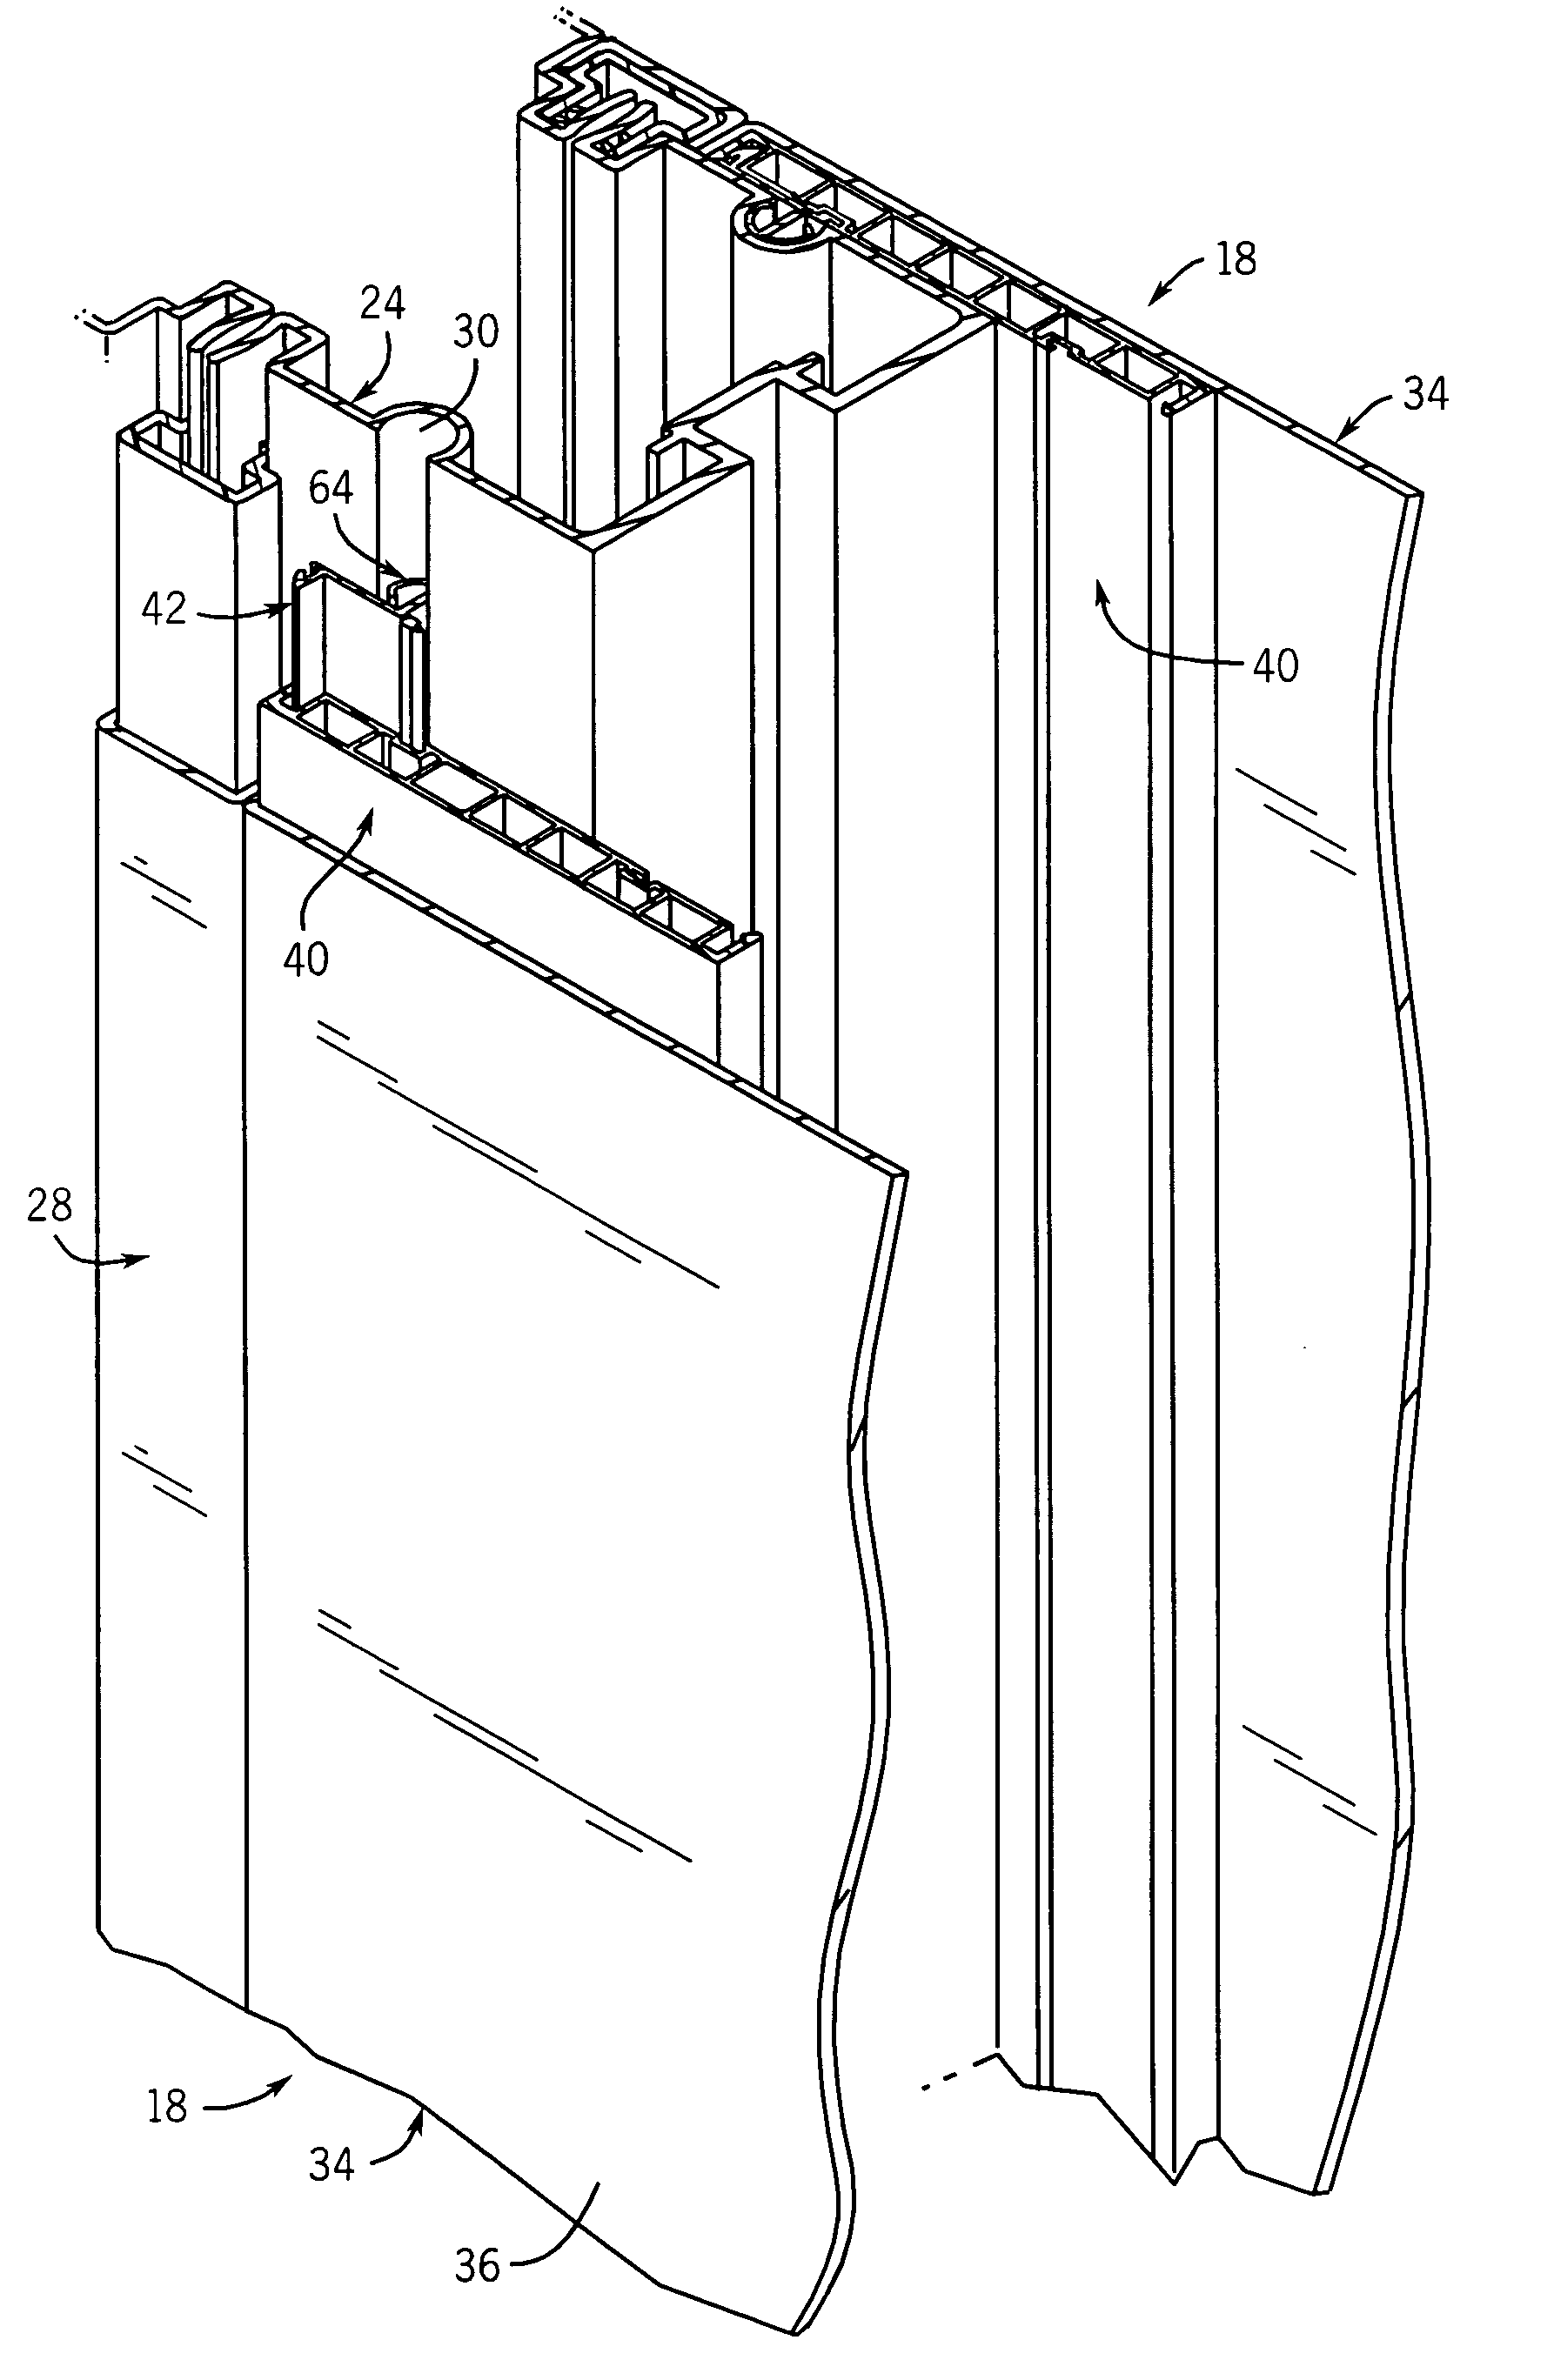 Stiffener construction having a snap-on connector, for use with a wall panel shell in a wall system